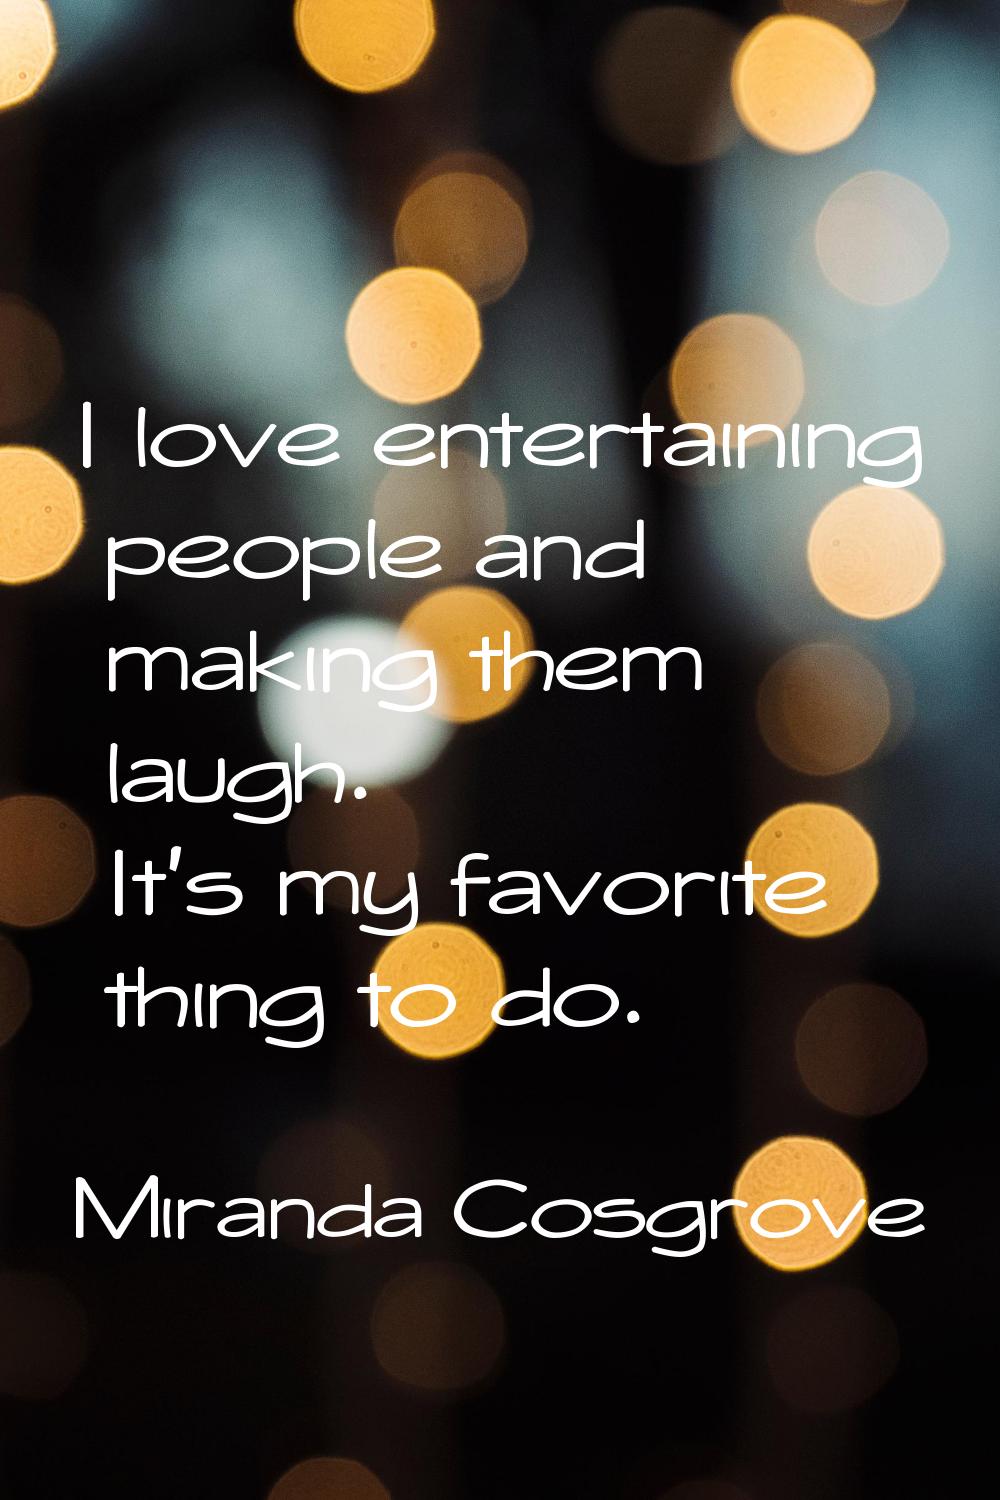 I love entertaining people and making them laugh. It's my favorite thing to do.